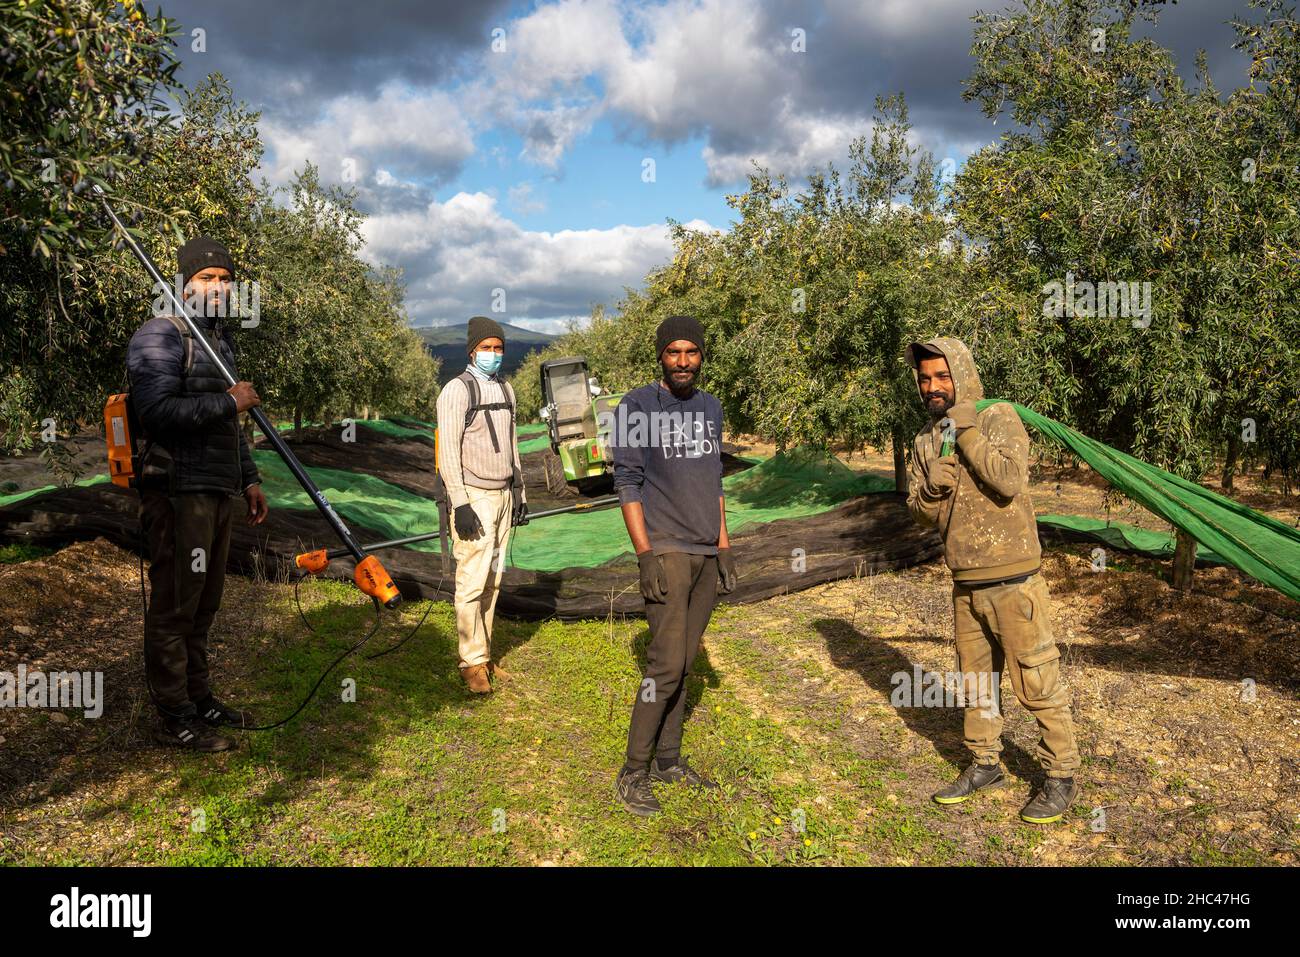 Agricultural workers harvesting olives on an olive grove Stock Photo